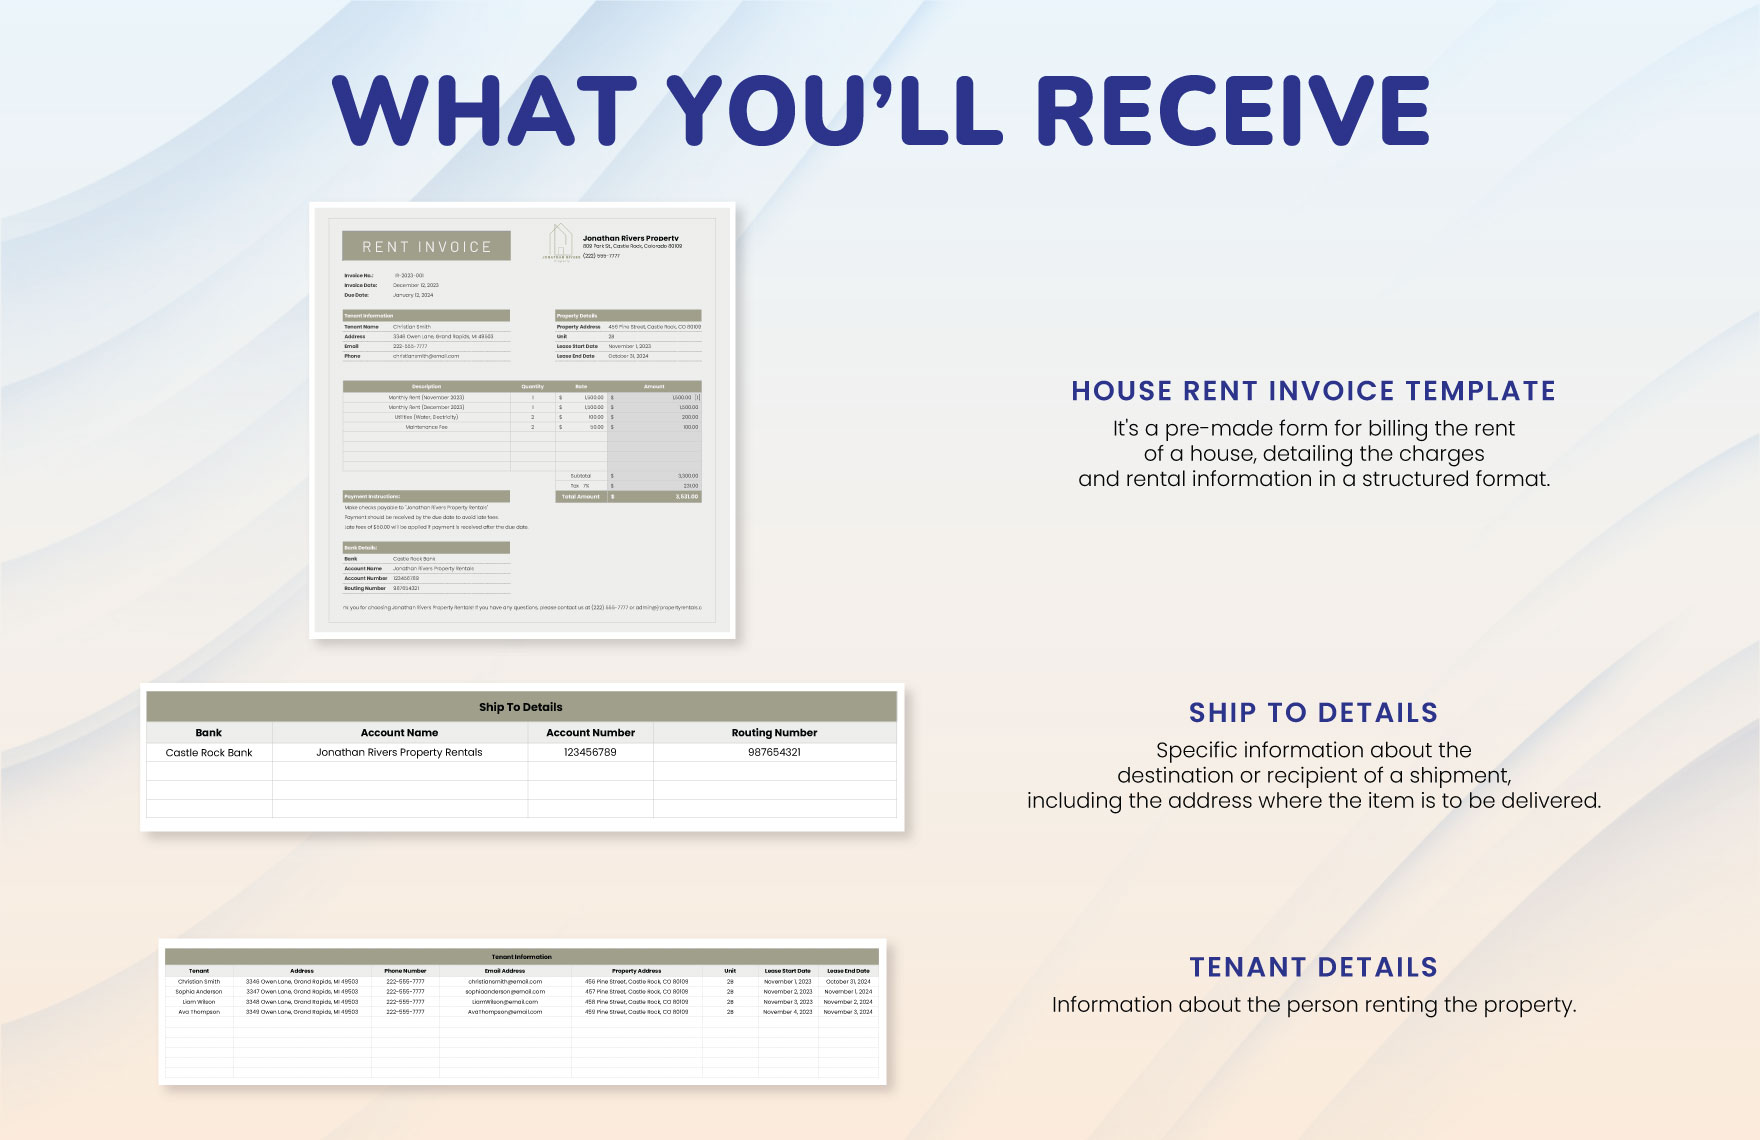 House Rent Invoice Template